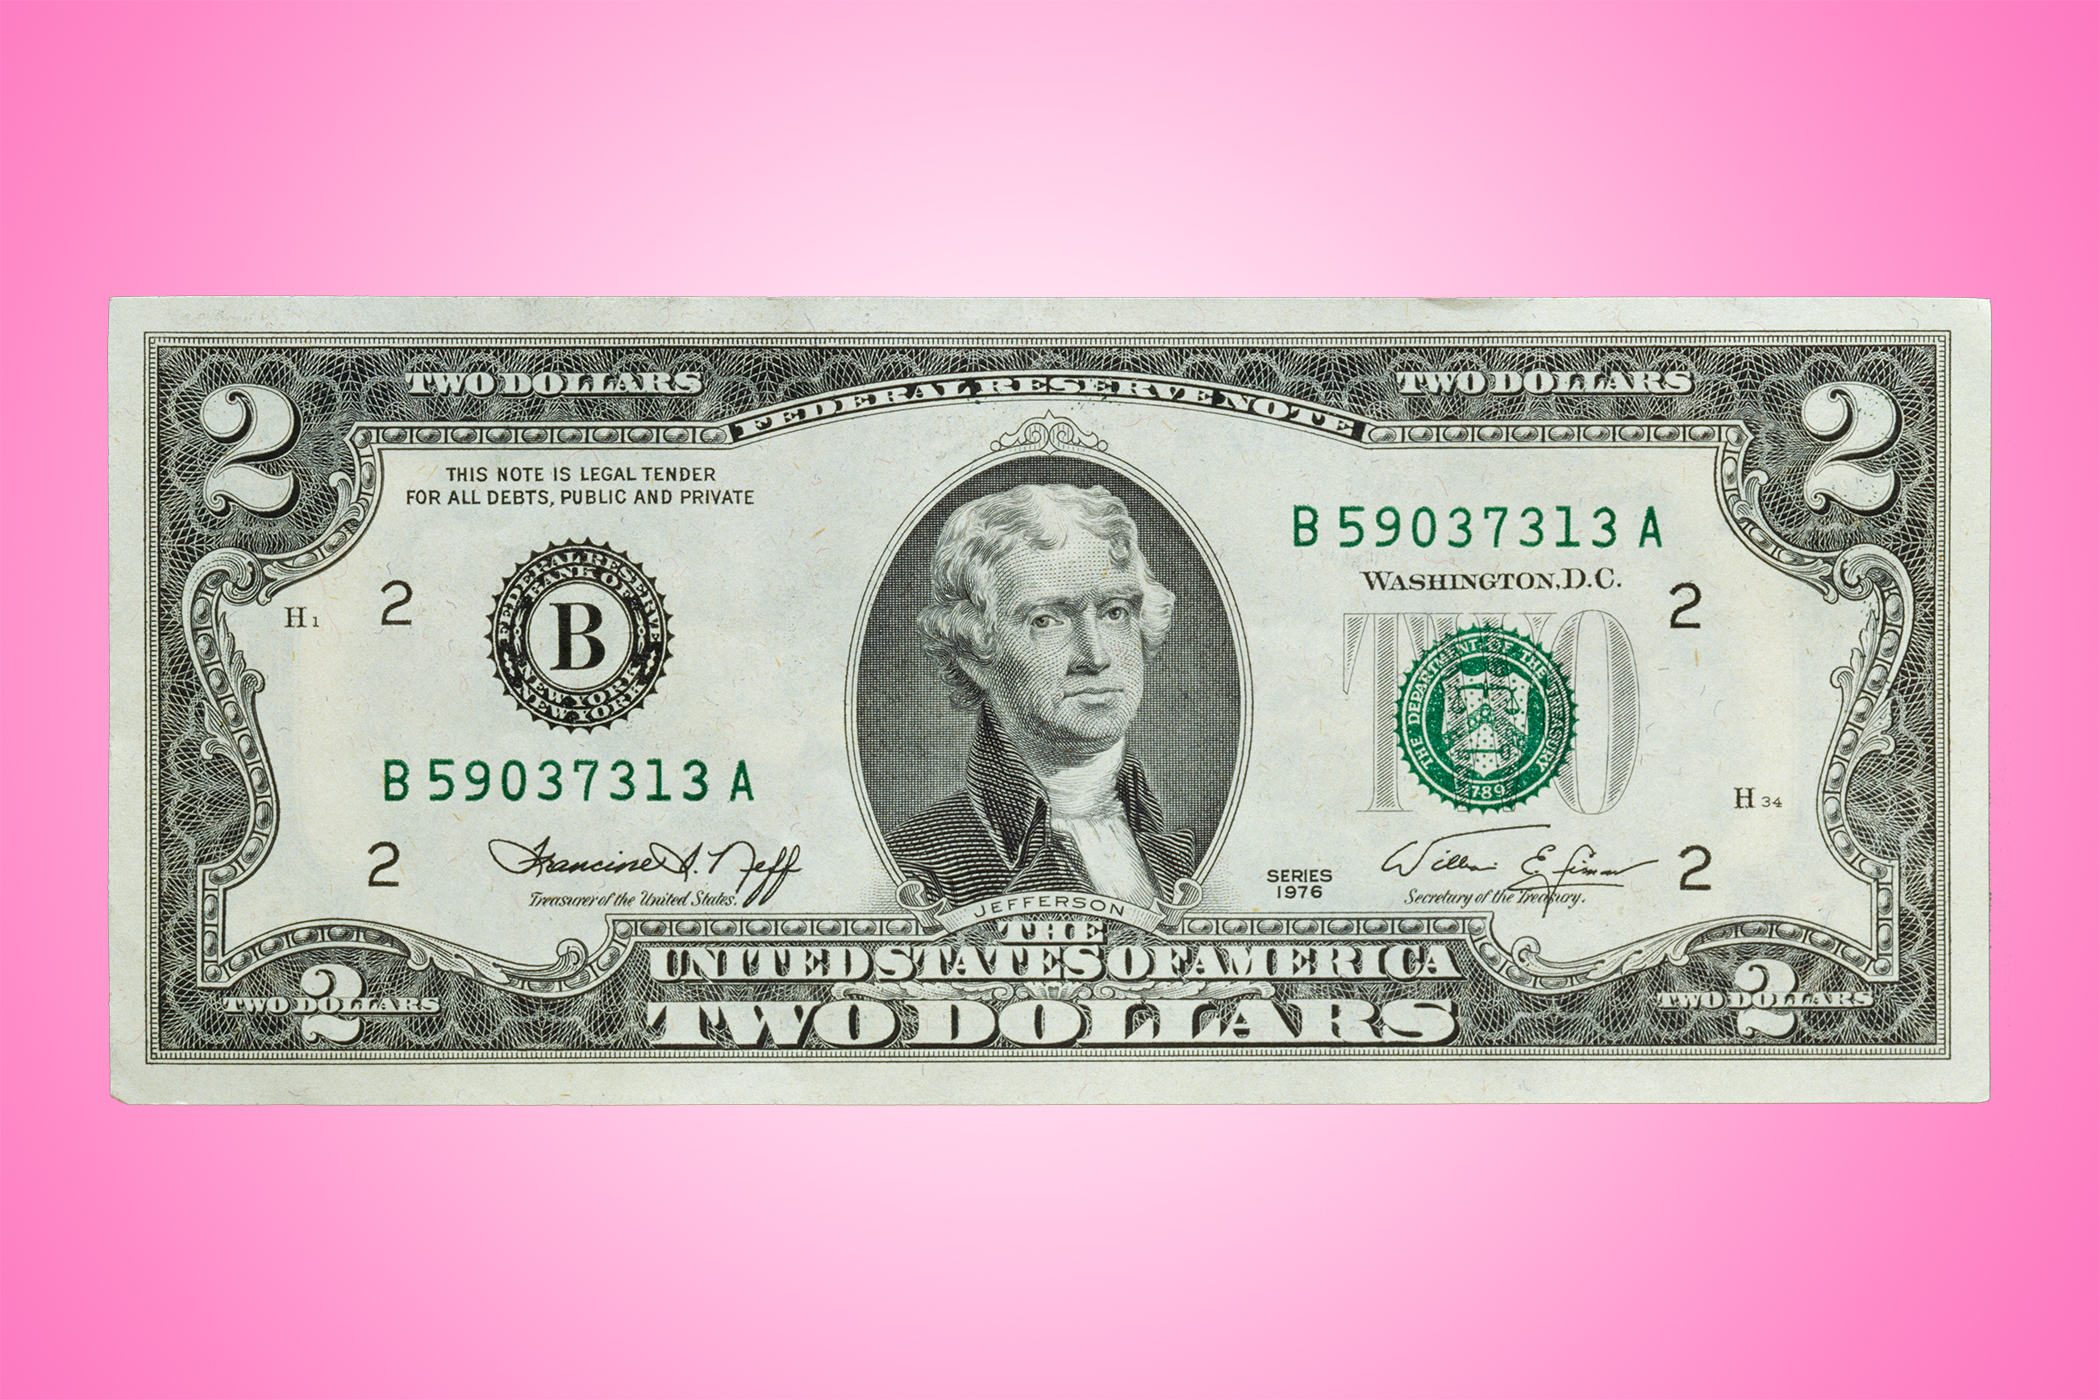 America’s Very Brief Love Affair With the $2 Bill